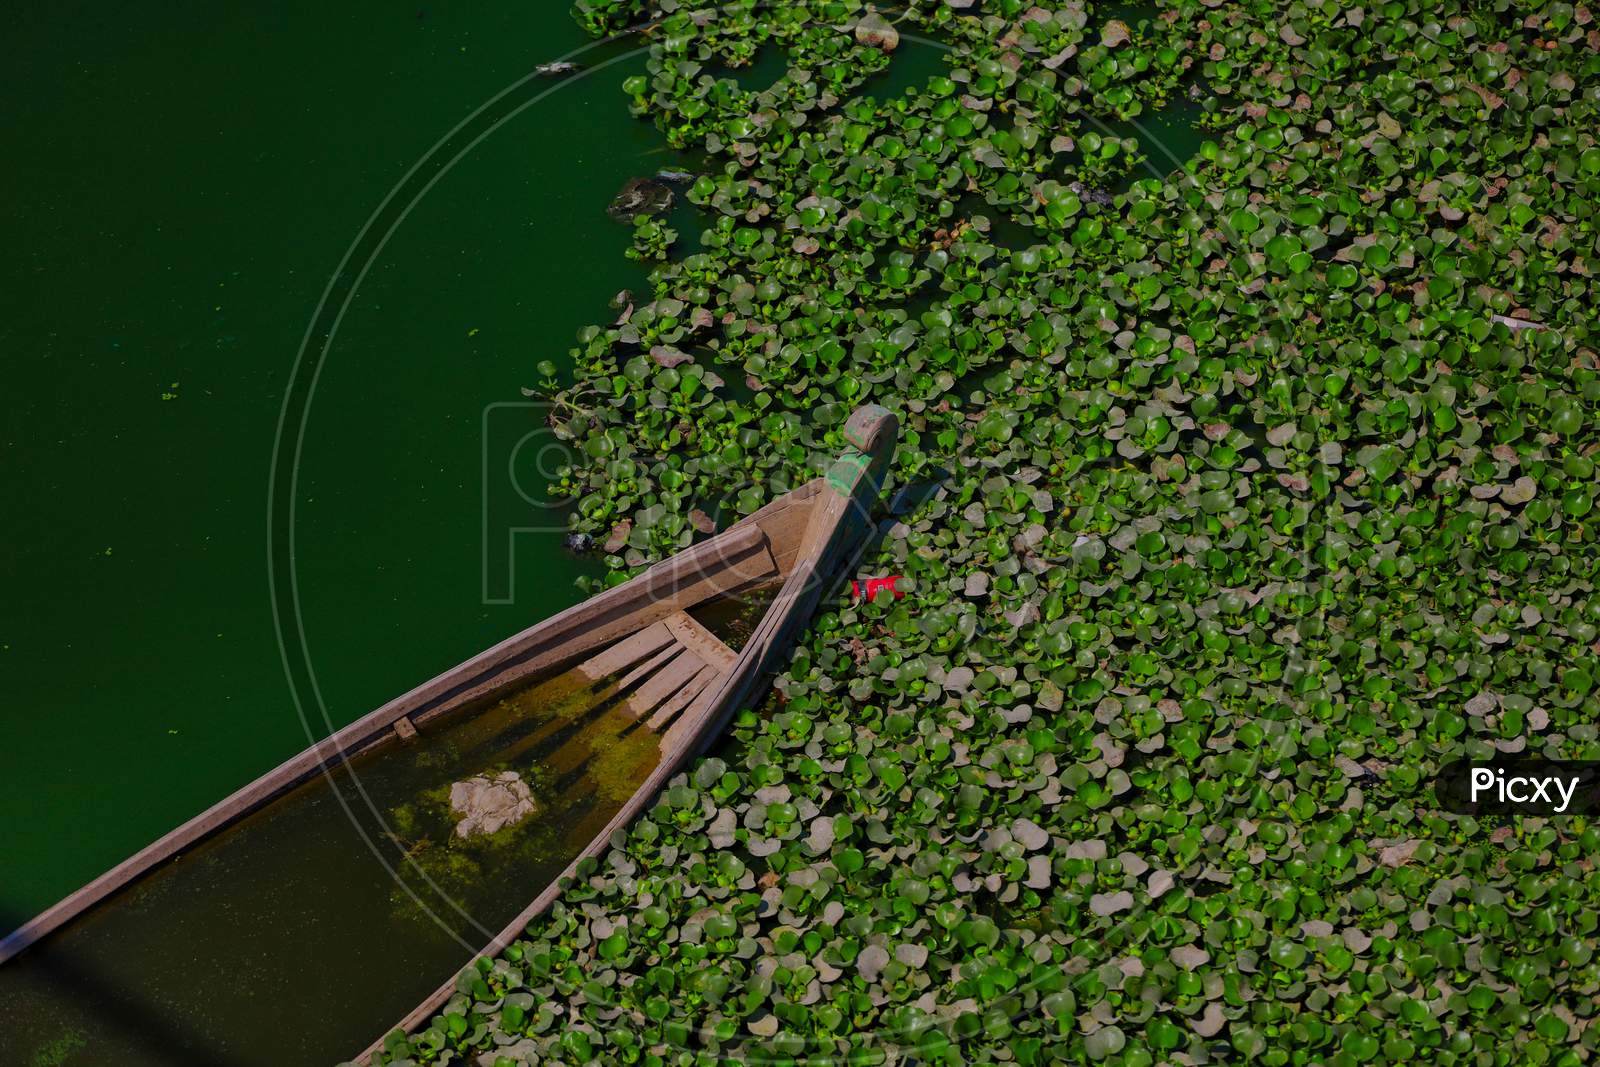 A Broken Boat in a Lake filled with Water